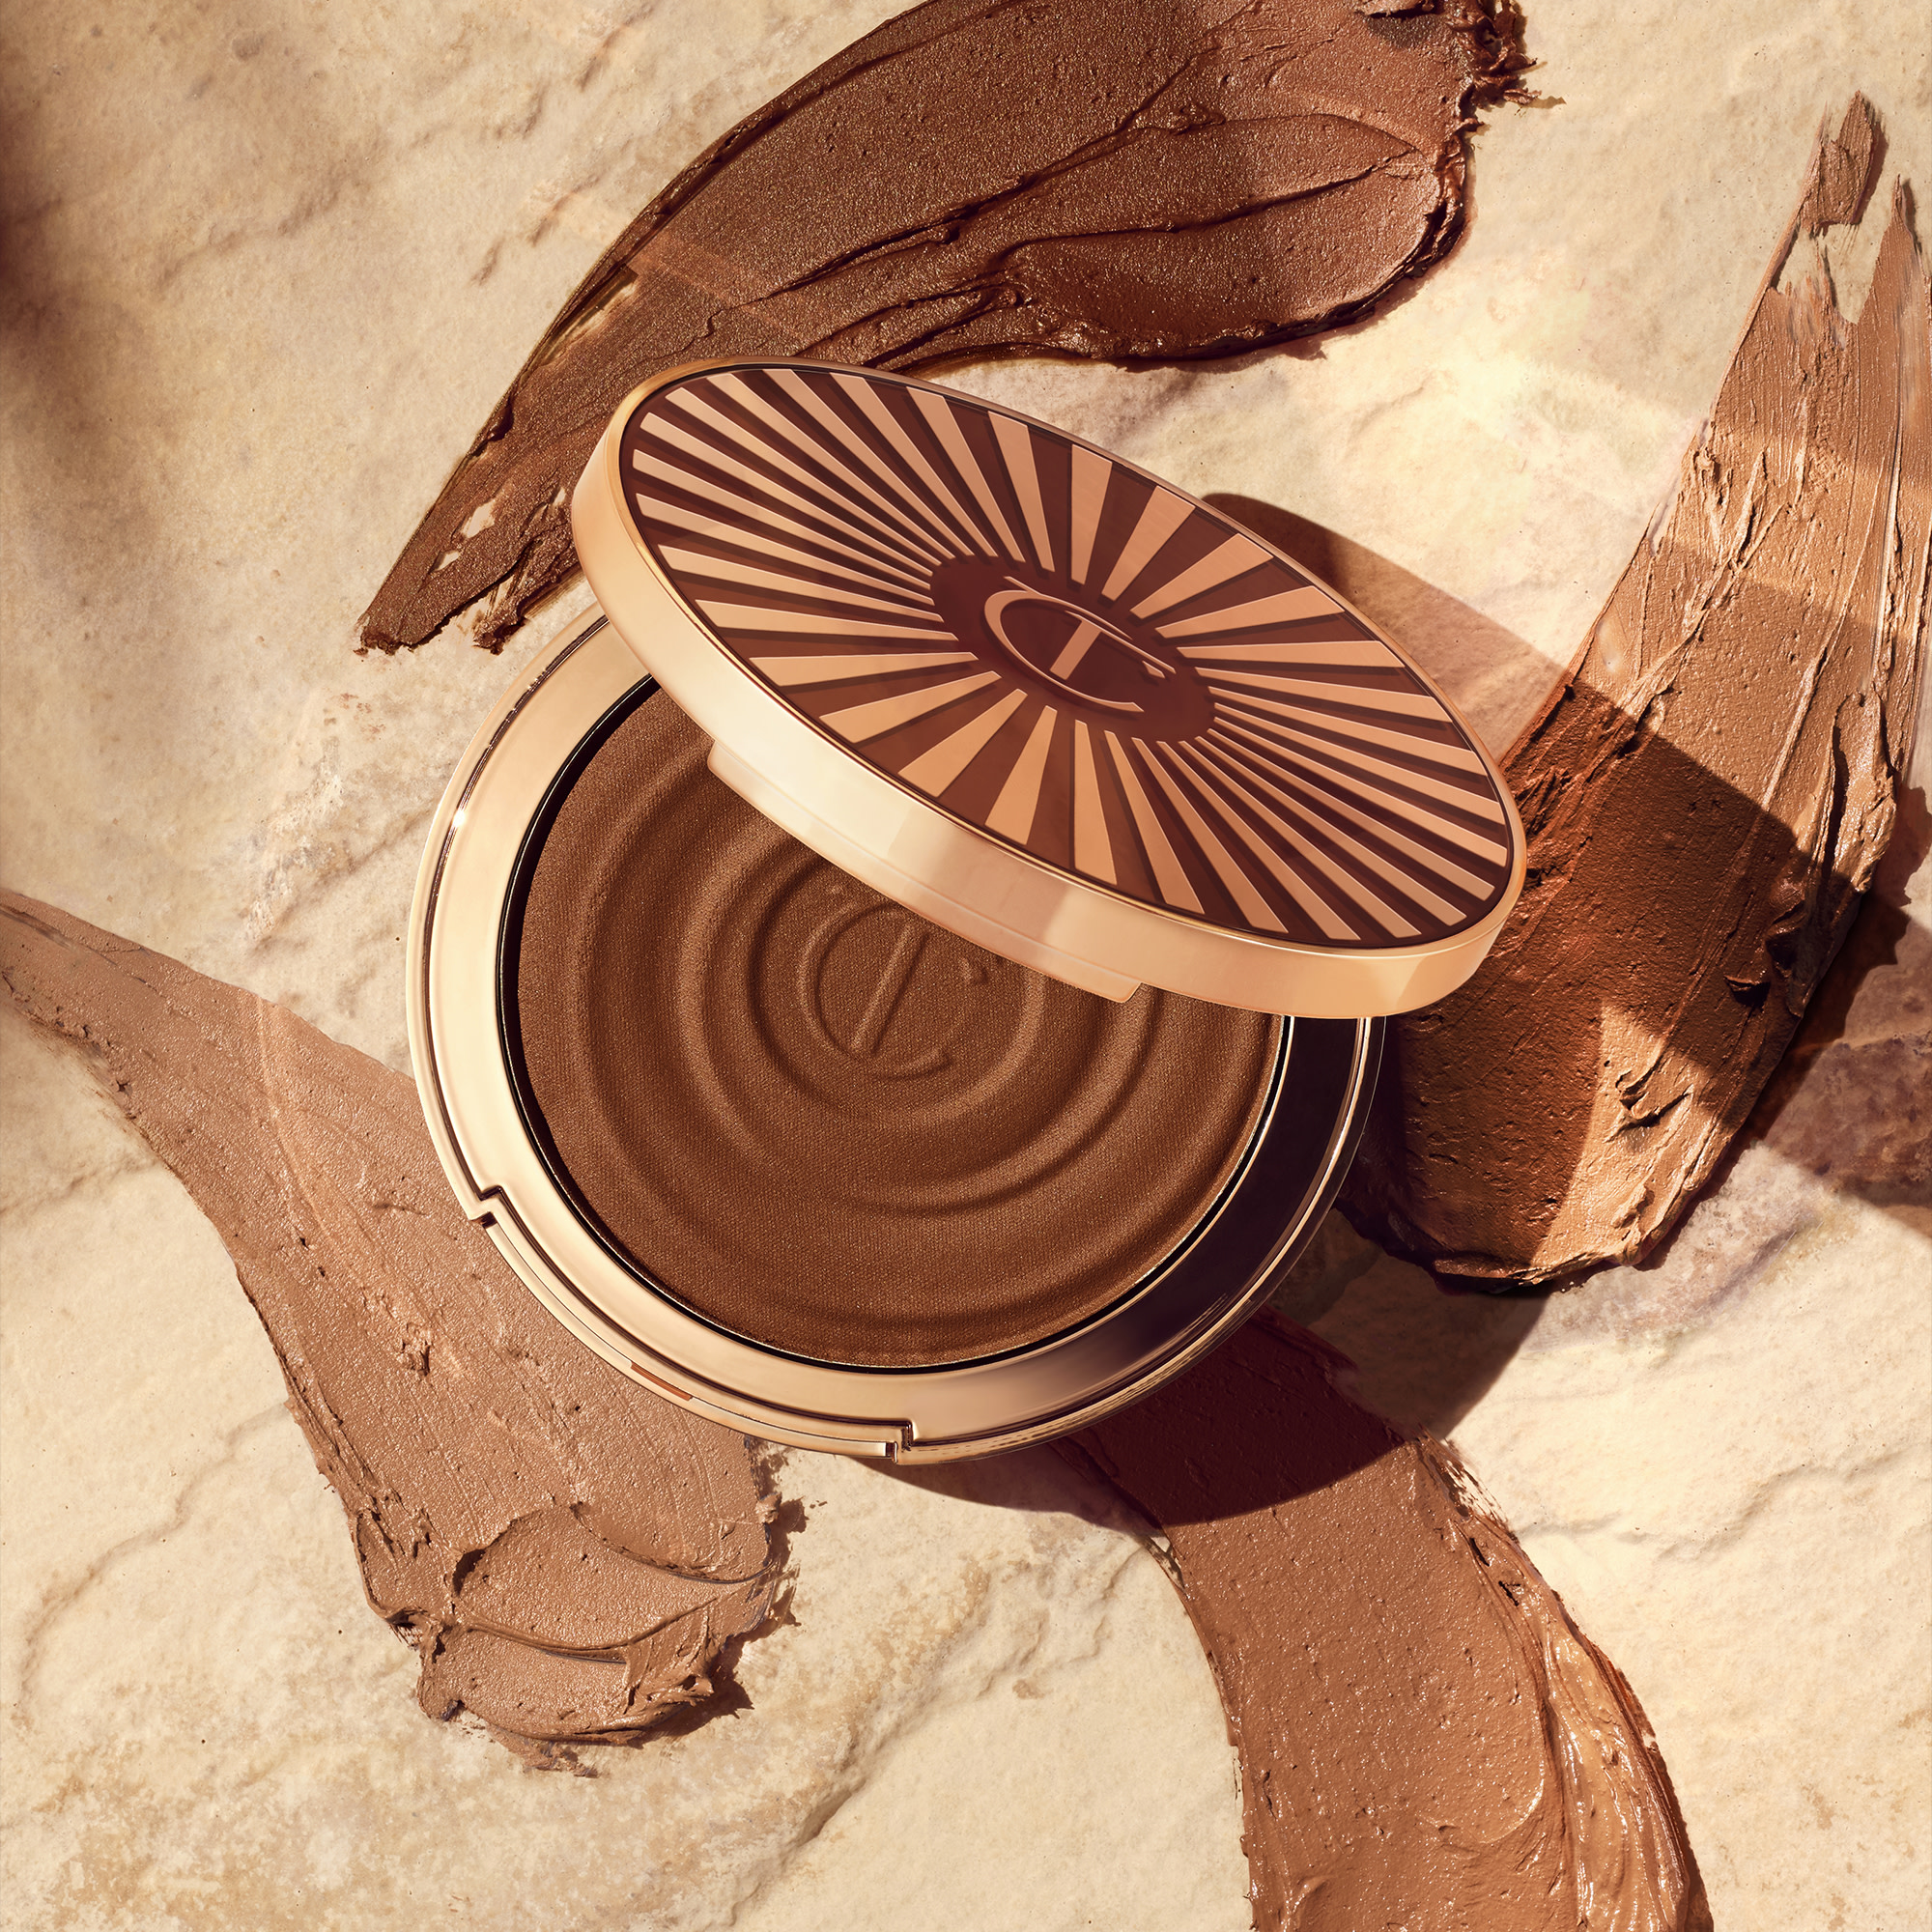 Open, cream bronzer compact in a light-sandy-brown shade with gold-coloured packaging with swatches of four different bronzers in various shades of brown behind it.